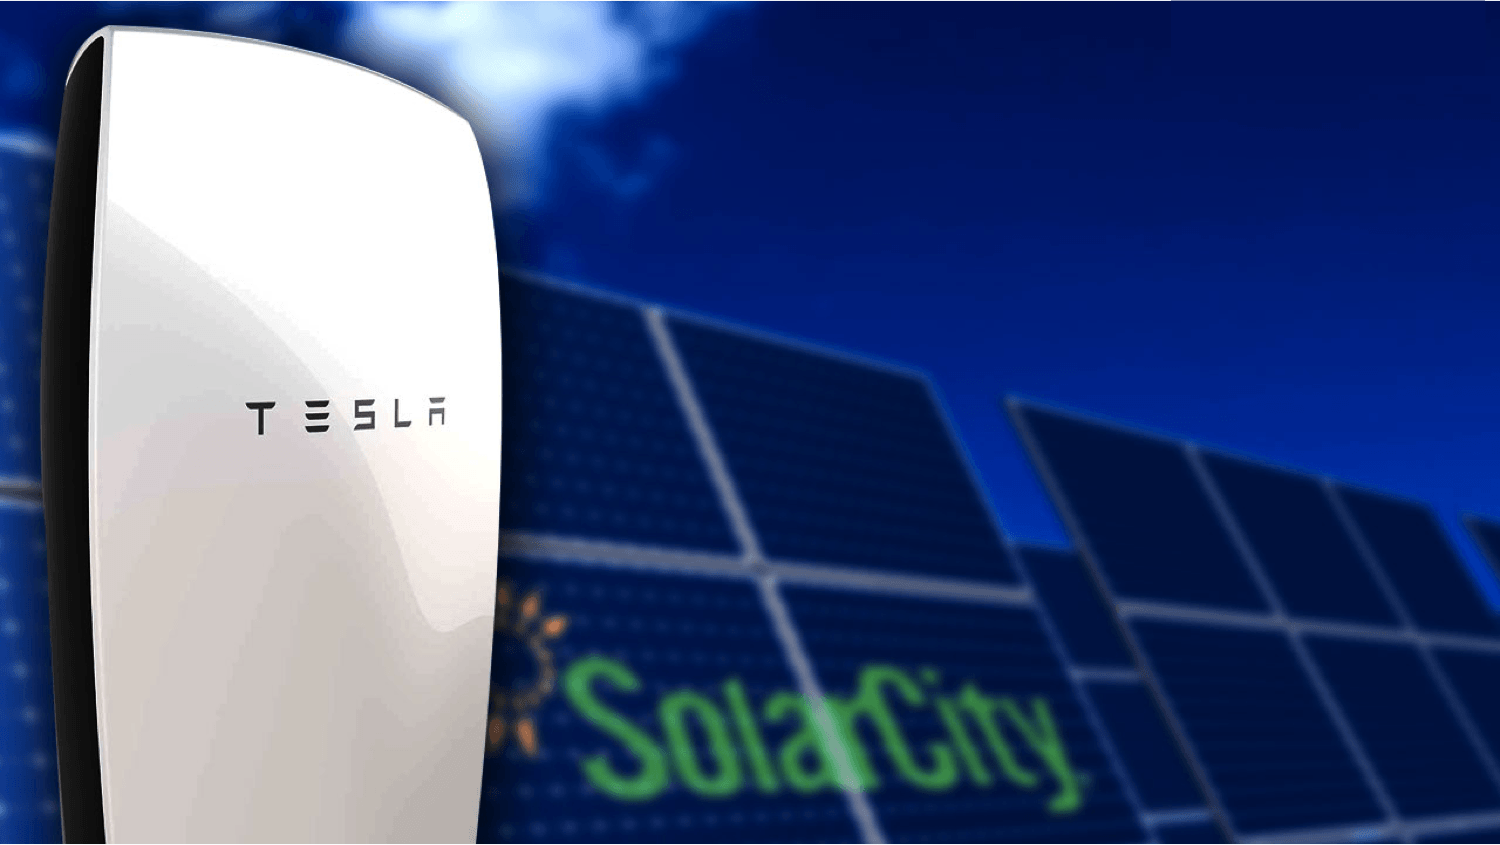 Is SolarCity still in business?